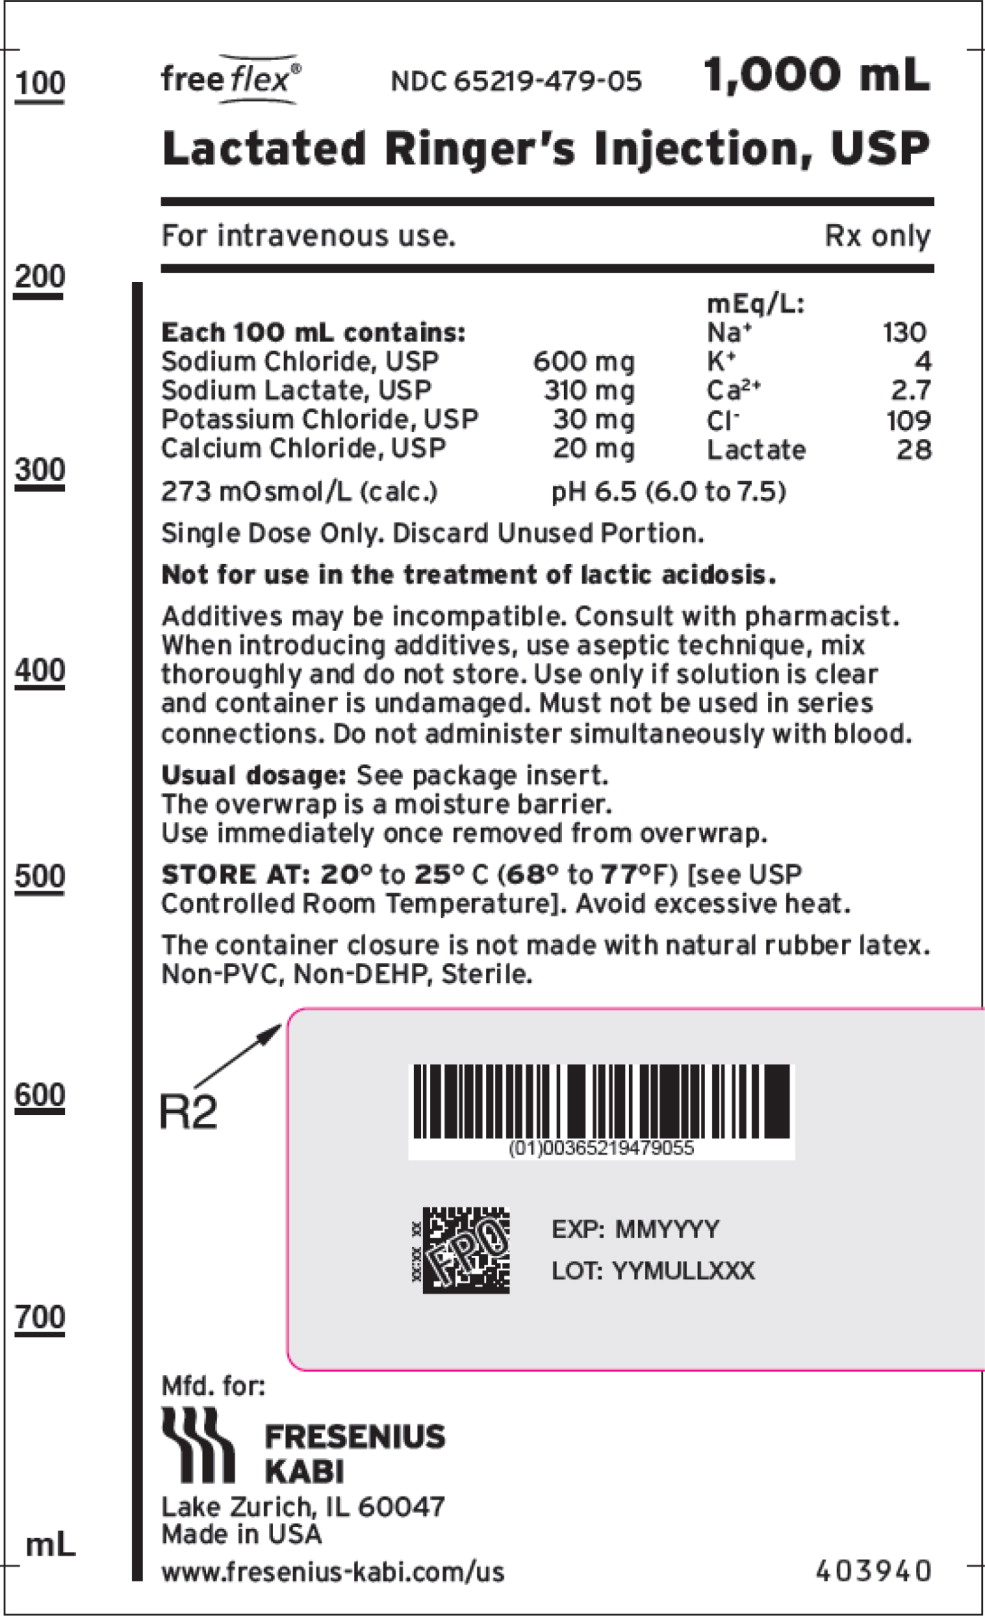 PACKAGE LABEL – PRINCIPAL DISPLAY – Lactated Ringer's Injection, USP 1000 mL Bag
